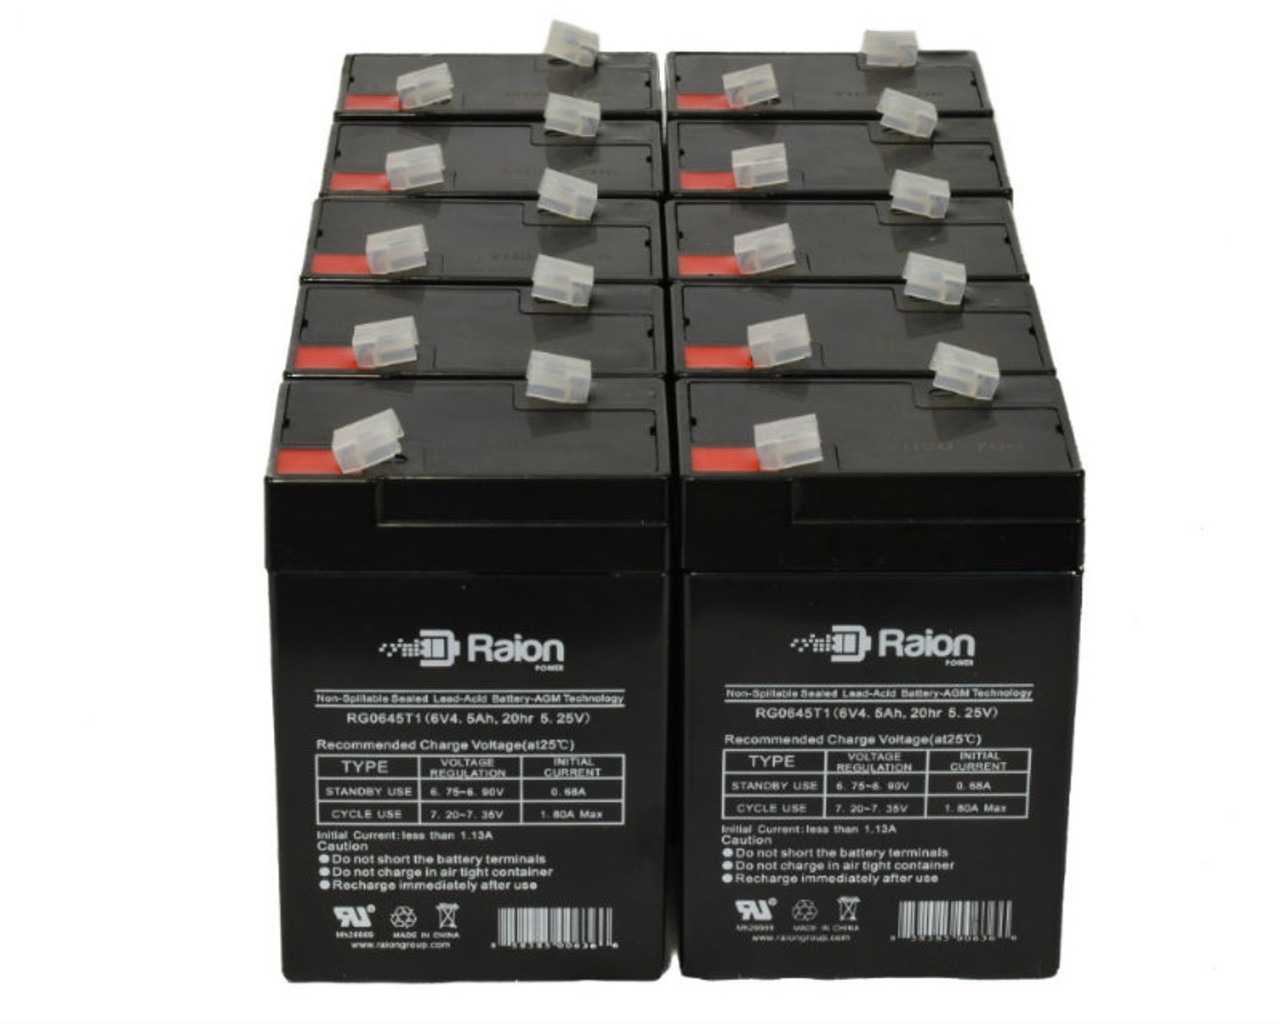 Raion Power 6V 4.5Ah Replacement Emergency Light Battery for Holophane 92804 - 10 Pack